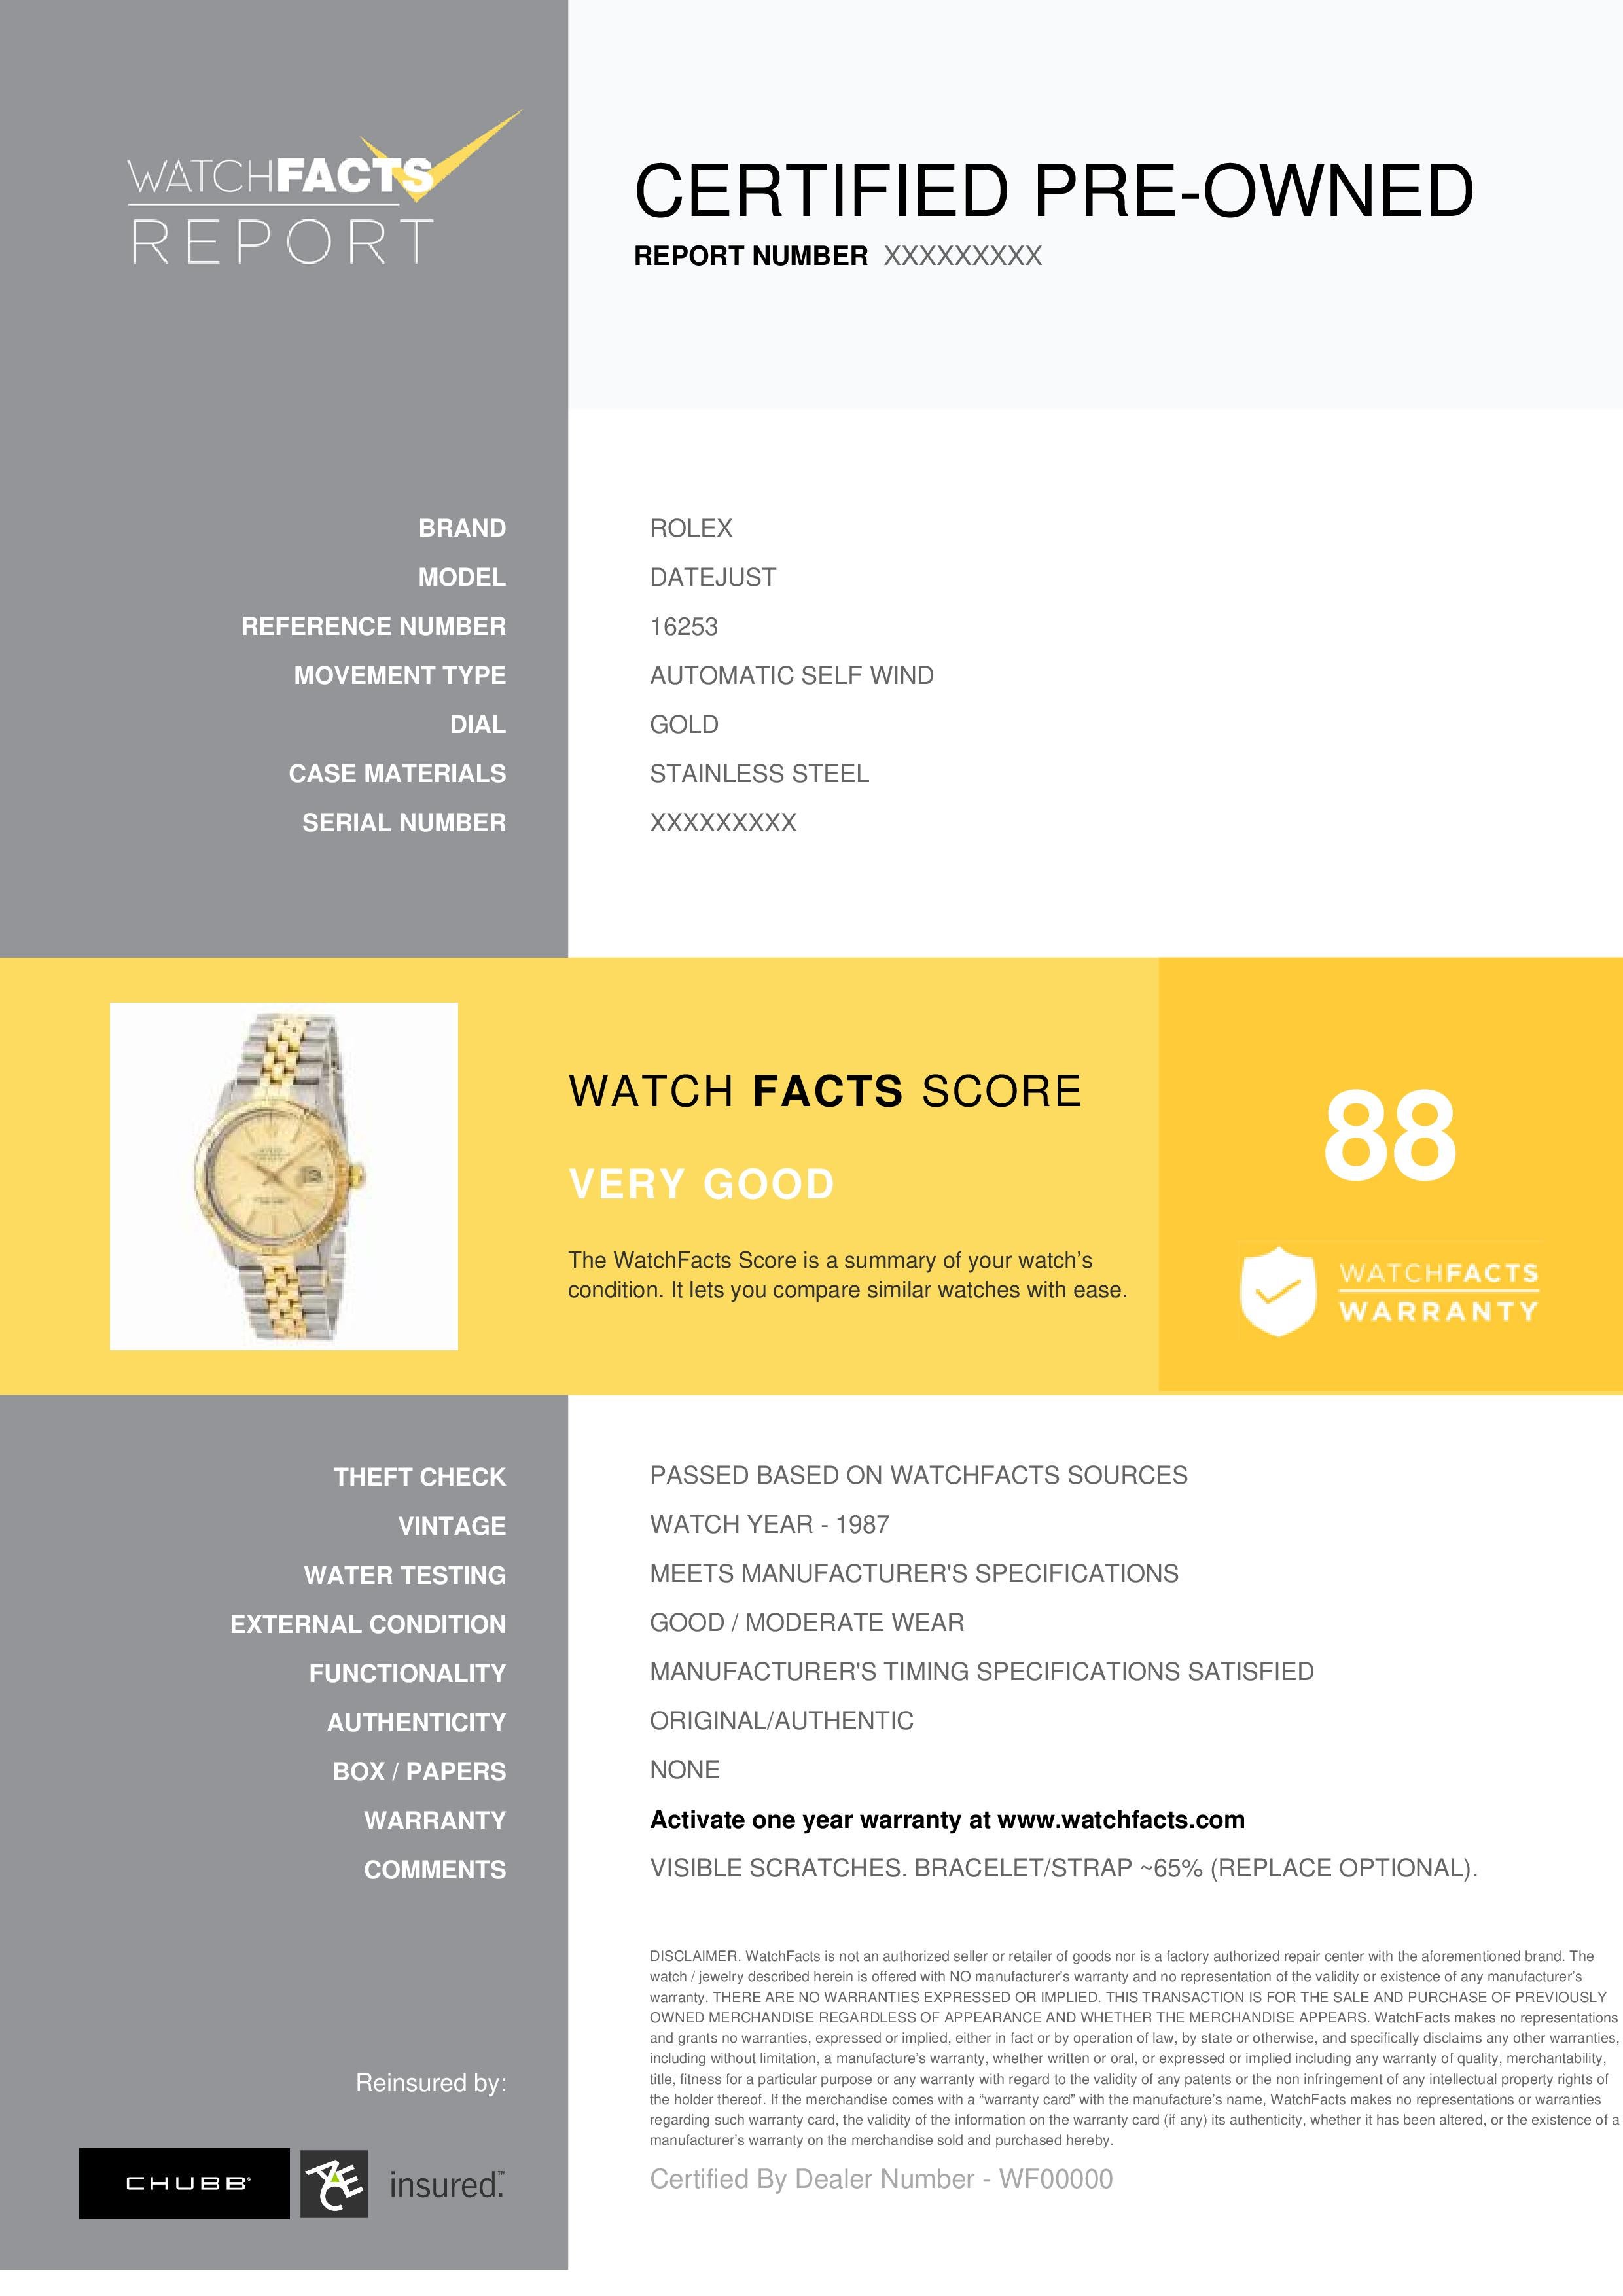 Rolex Datejust Reference #: 16253. Mens Automatic Self Wind Watch Stainless Steel Gold 36 MM. Verified and Certified by WatchFacts. 1 year warranty offered by WatchFacts.
